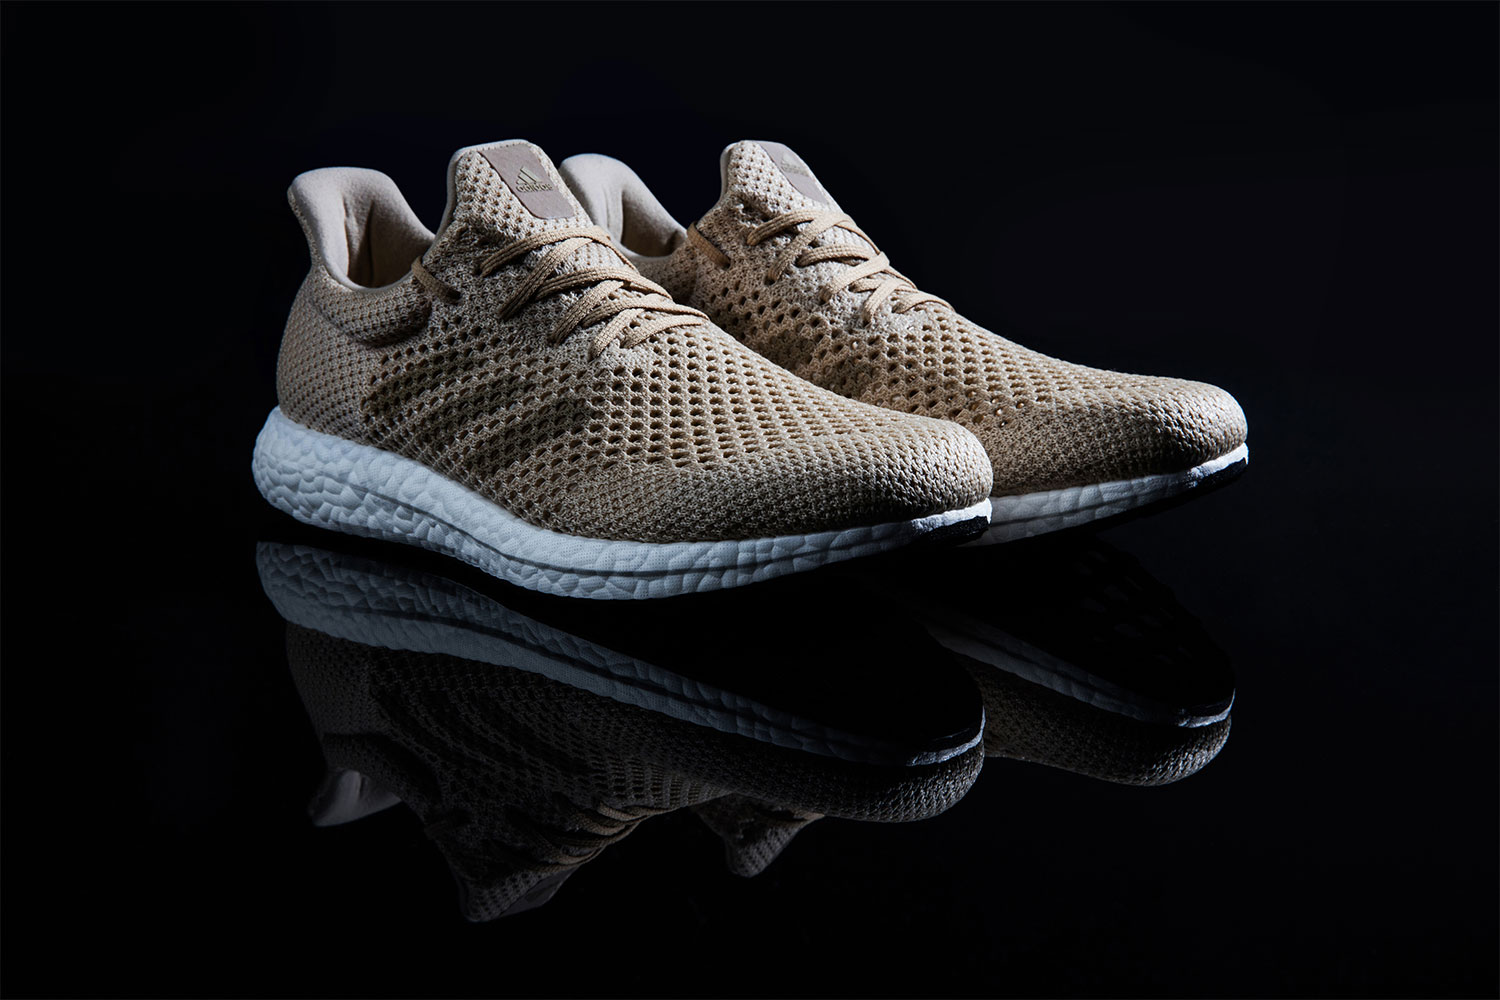 Adidas Develops Biodegradable, Synthetic Spider Silk Shoes | Digital Trends